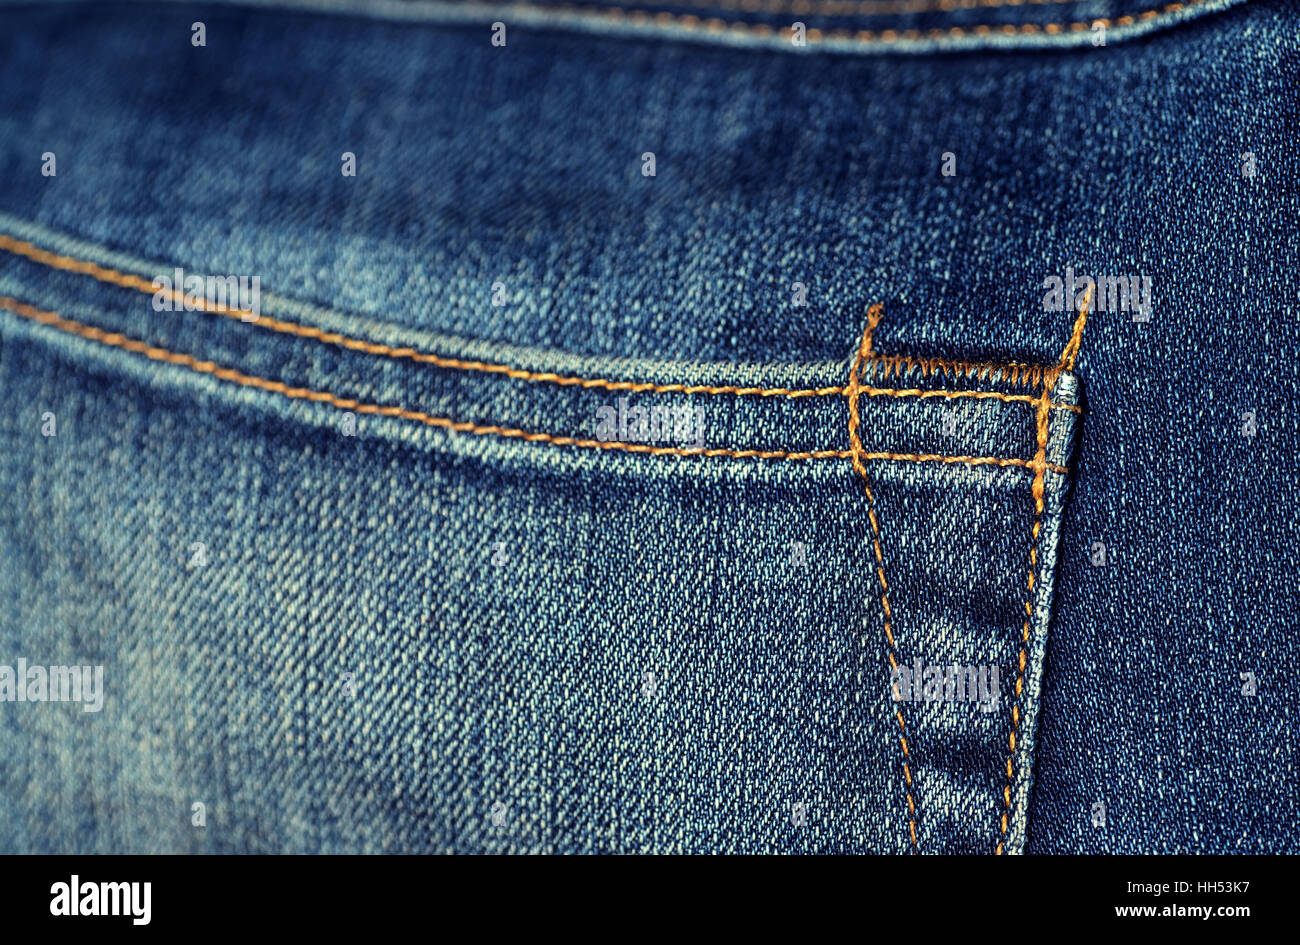 Macro closeup of yellow stitch on a pair of faded denim jeans. Stiching is of the back pocket corner. Stock Photo